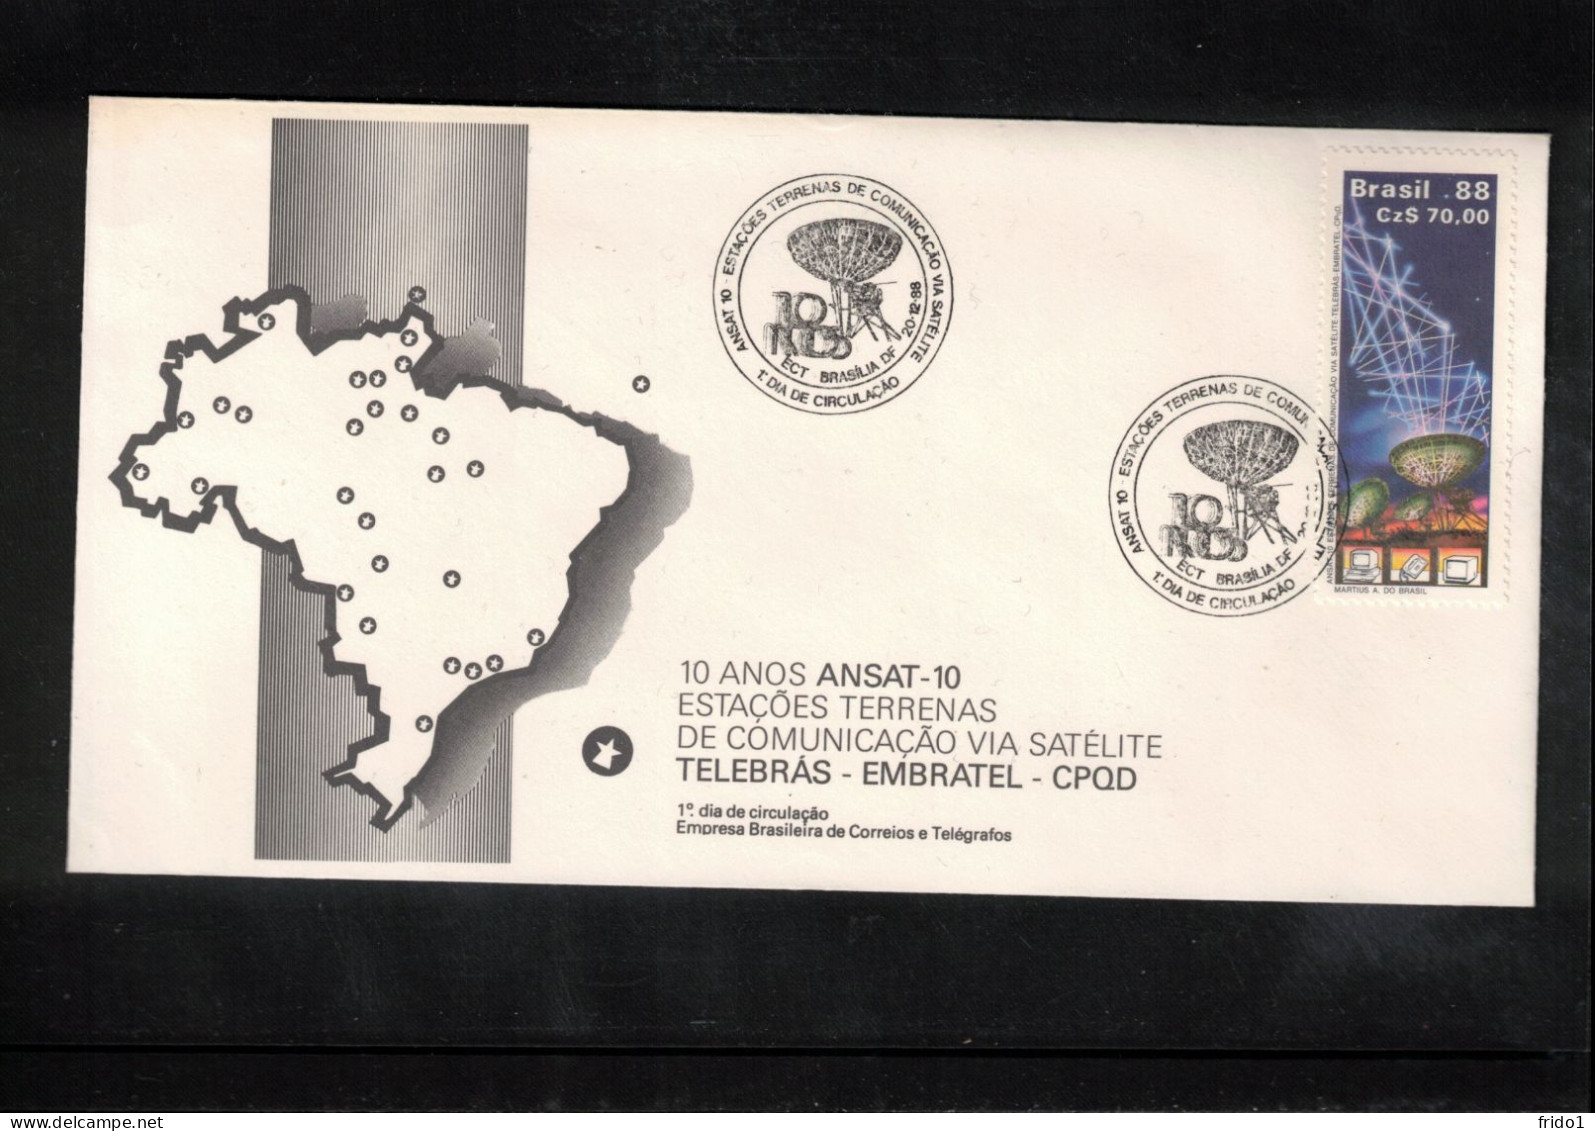 Brasil 1988 Space / Weltraum 10th Anniversary Of ANSAT-10 Satellite Communications Interesting Cover FDC - América Del Sur